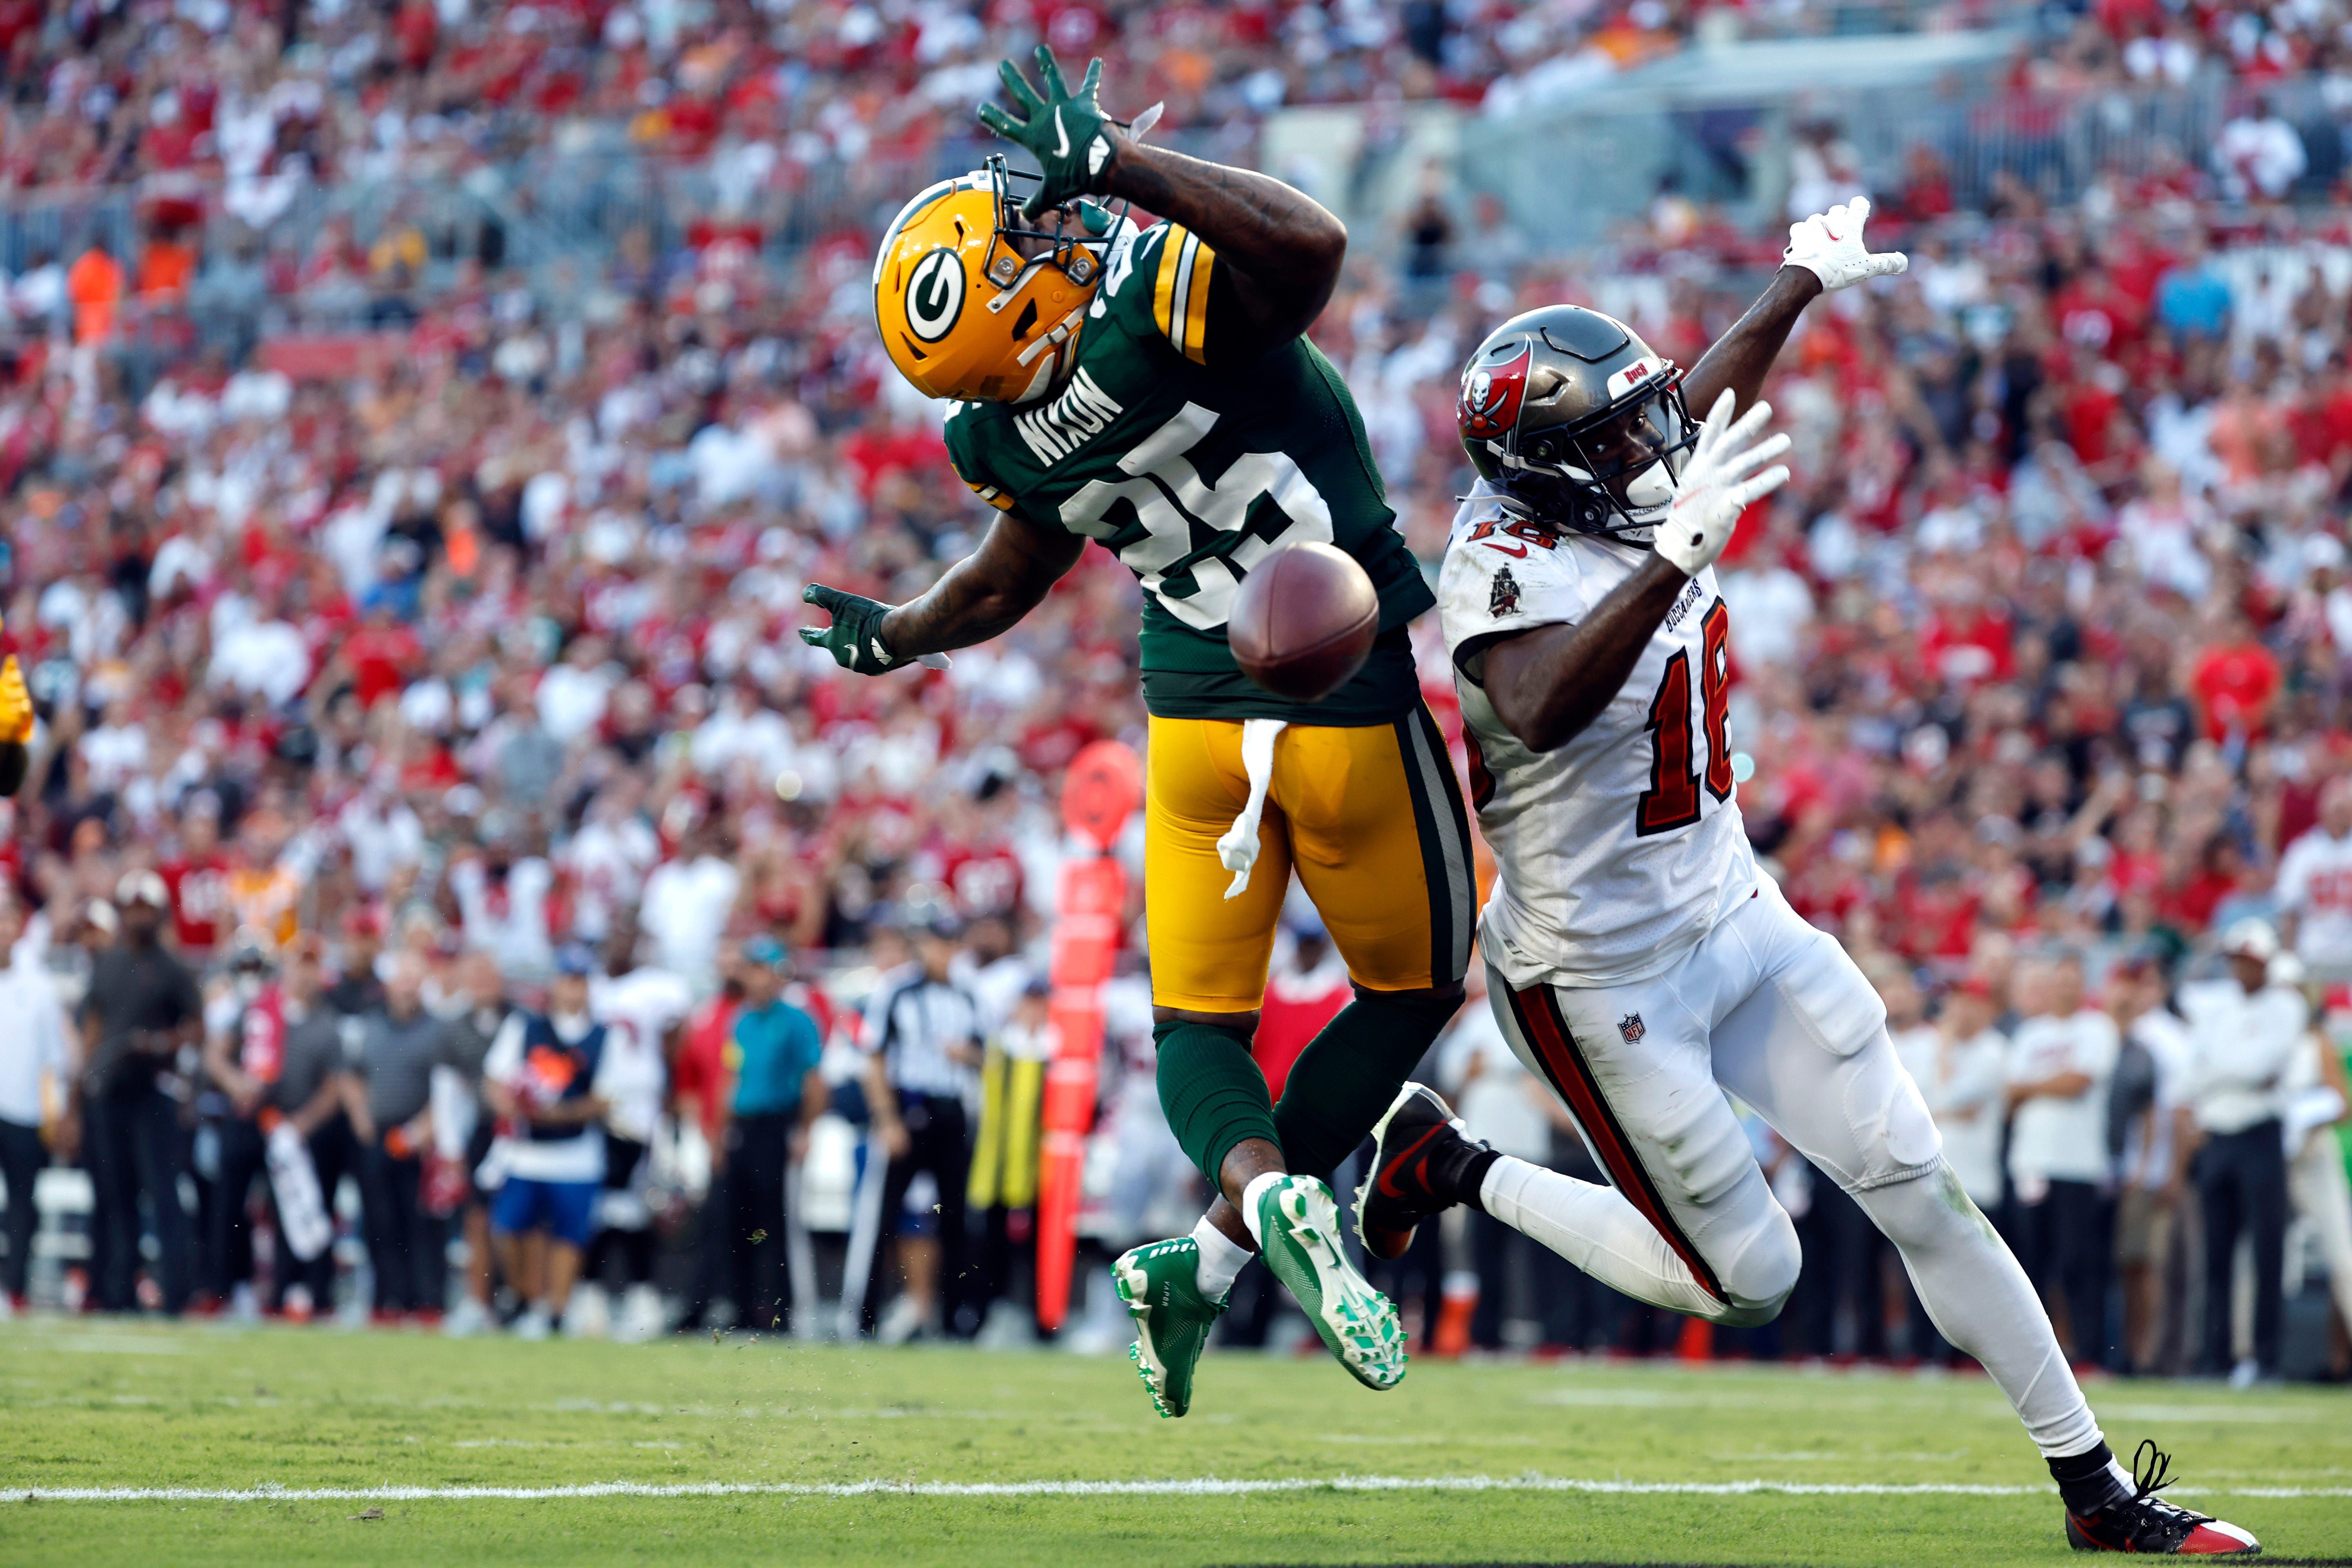 Green Bay Packers cornerback Keisean Nixon (25) breaks up a catch intended for Tampa Bay Buccaneers wide receiver Breshad Perriman during the second half on Sept. 25, 2022, at Raymond James Stadium in Tampa, Florida.